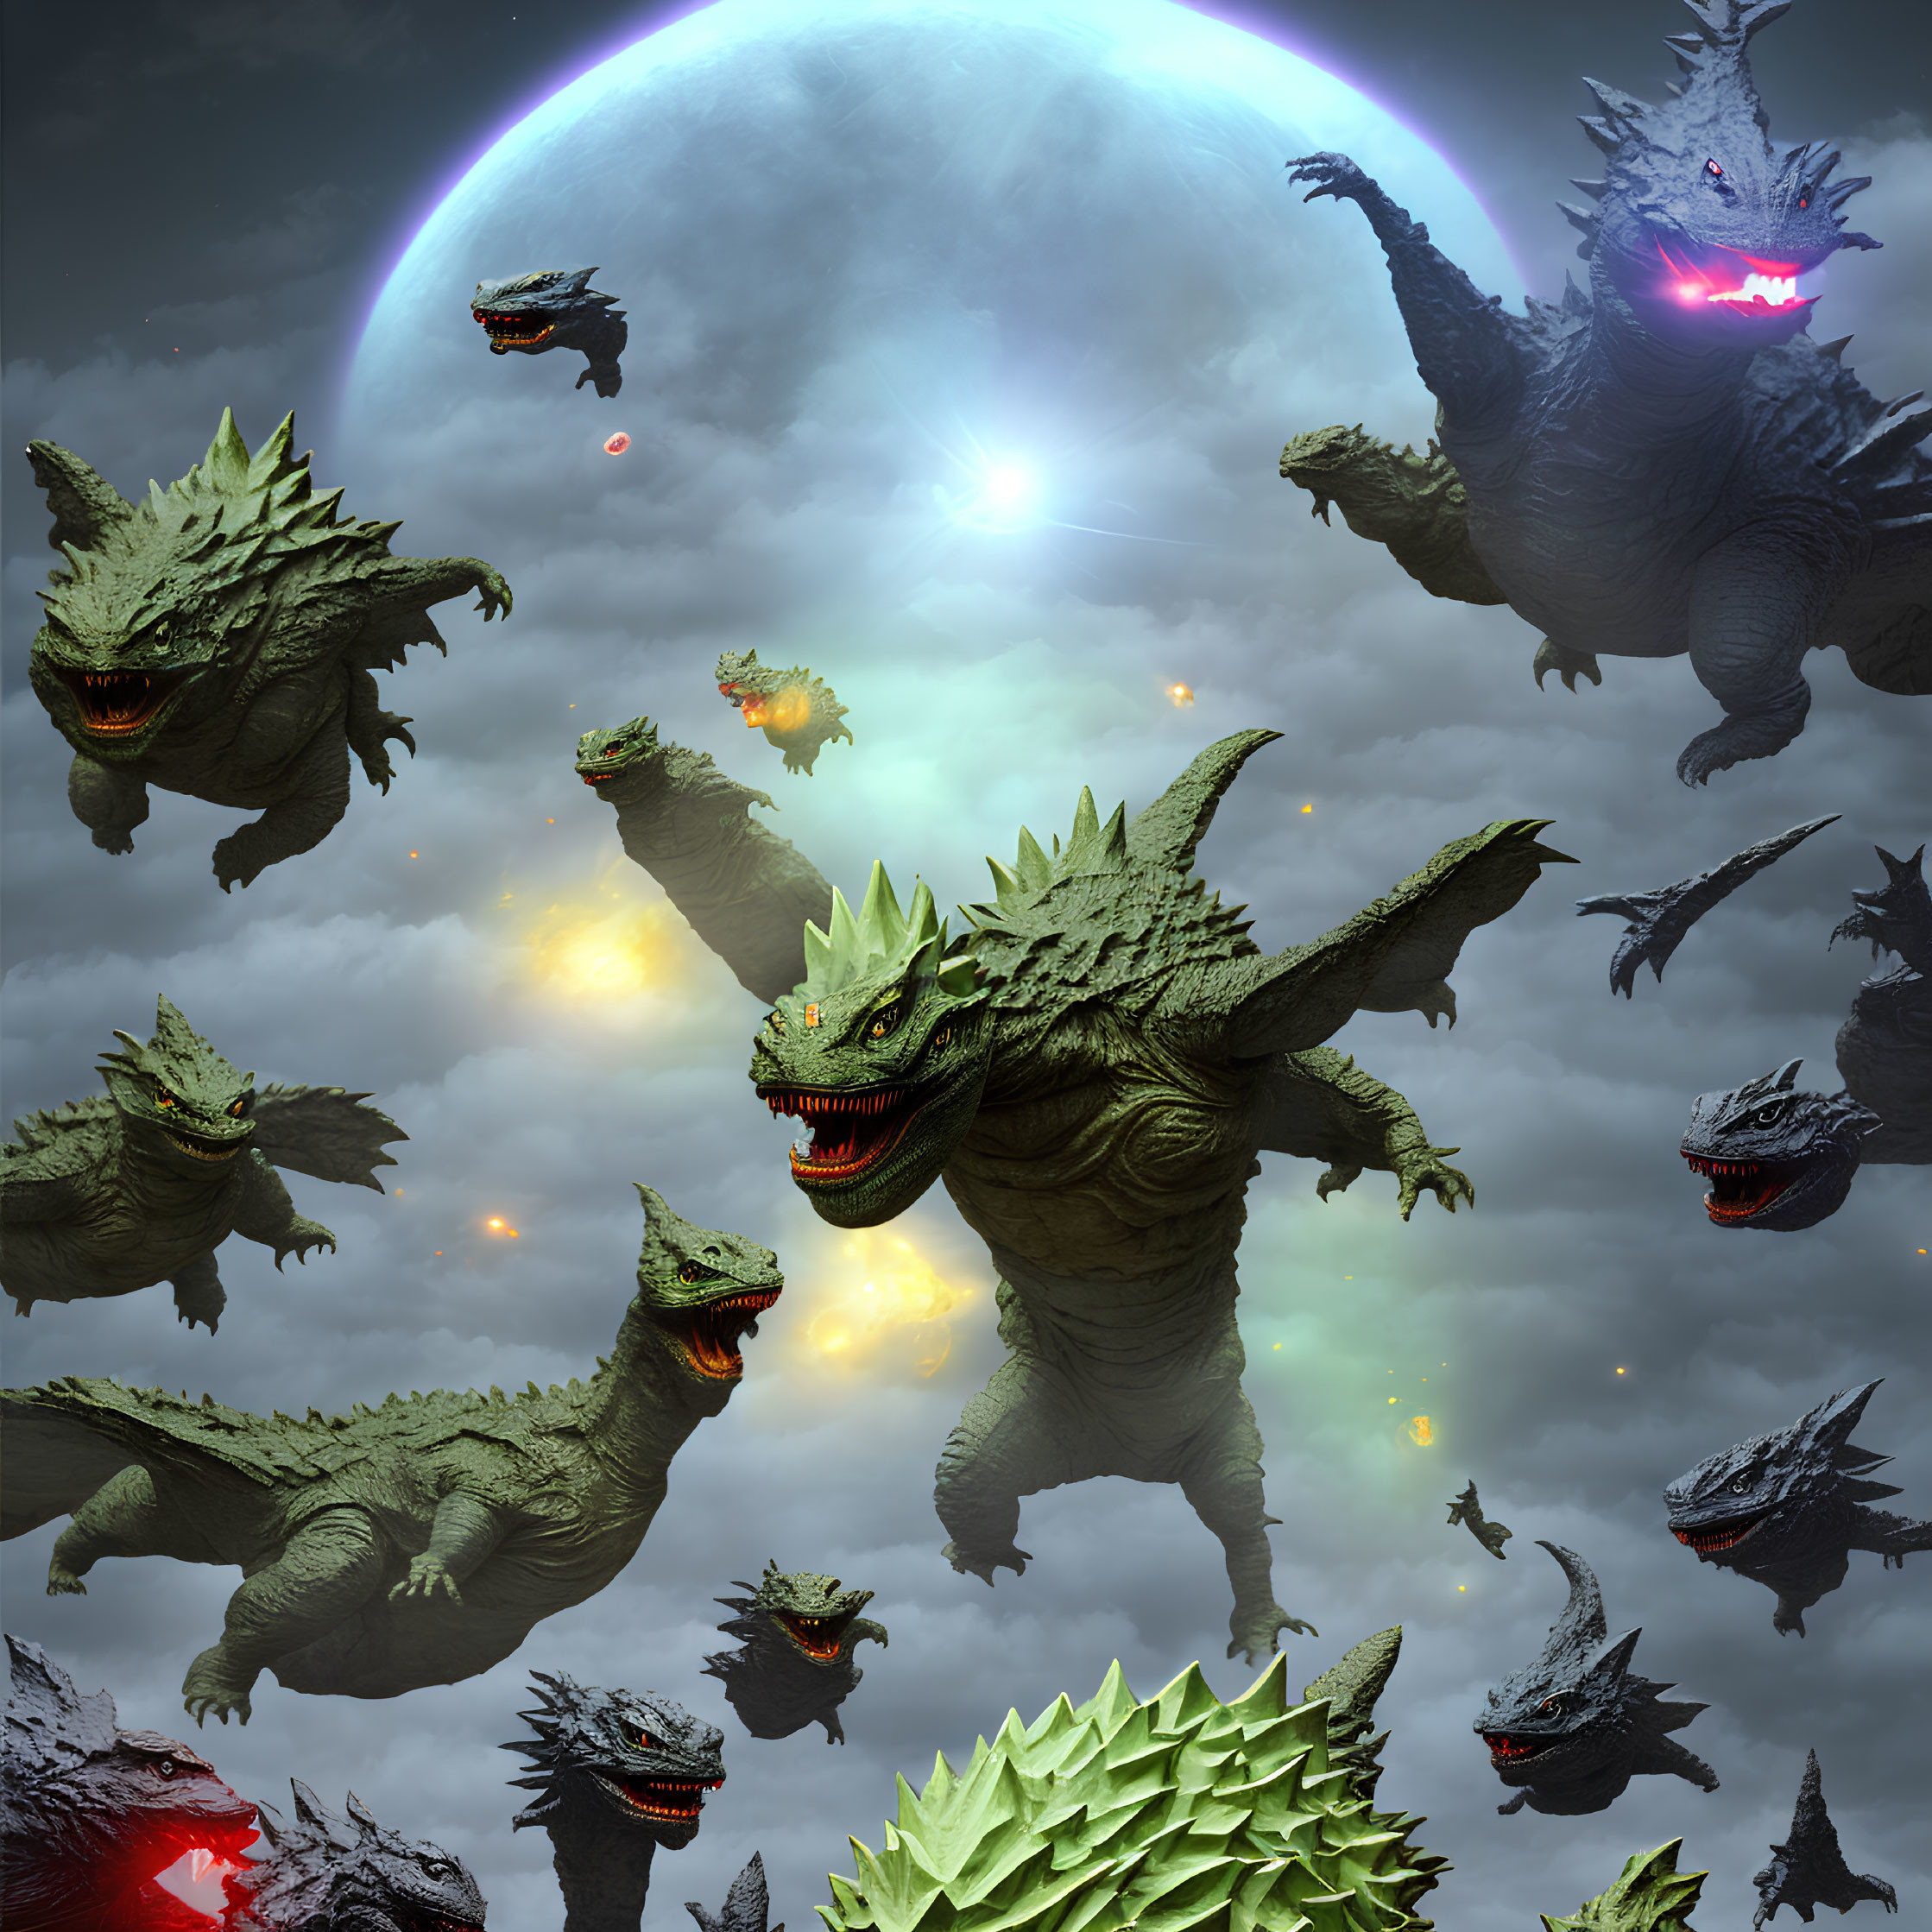 Fantasy scene with multiple menacing creatures under moon and distant planet